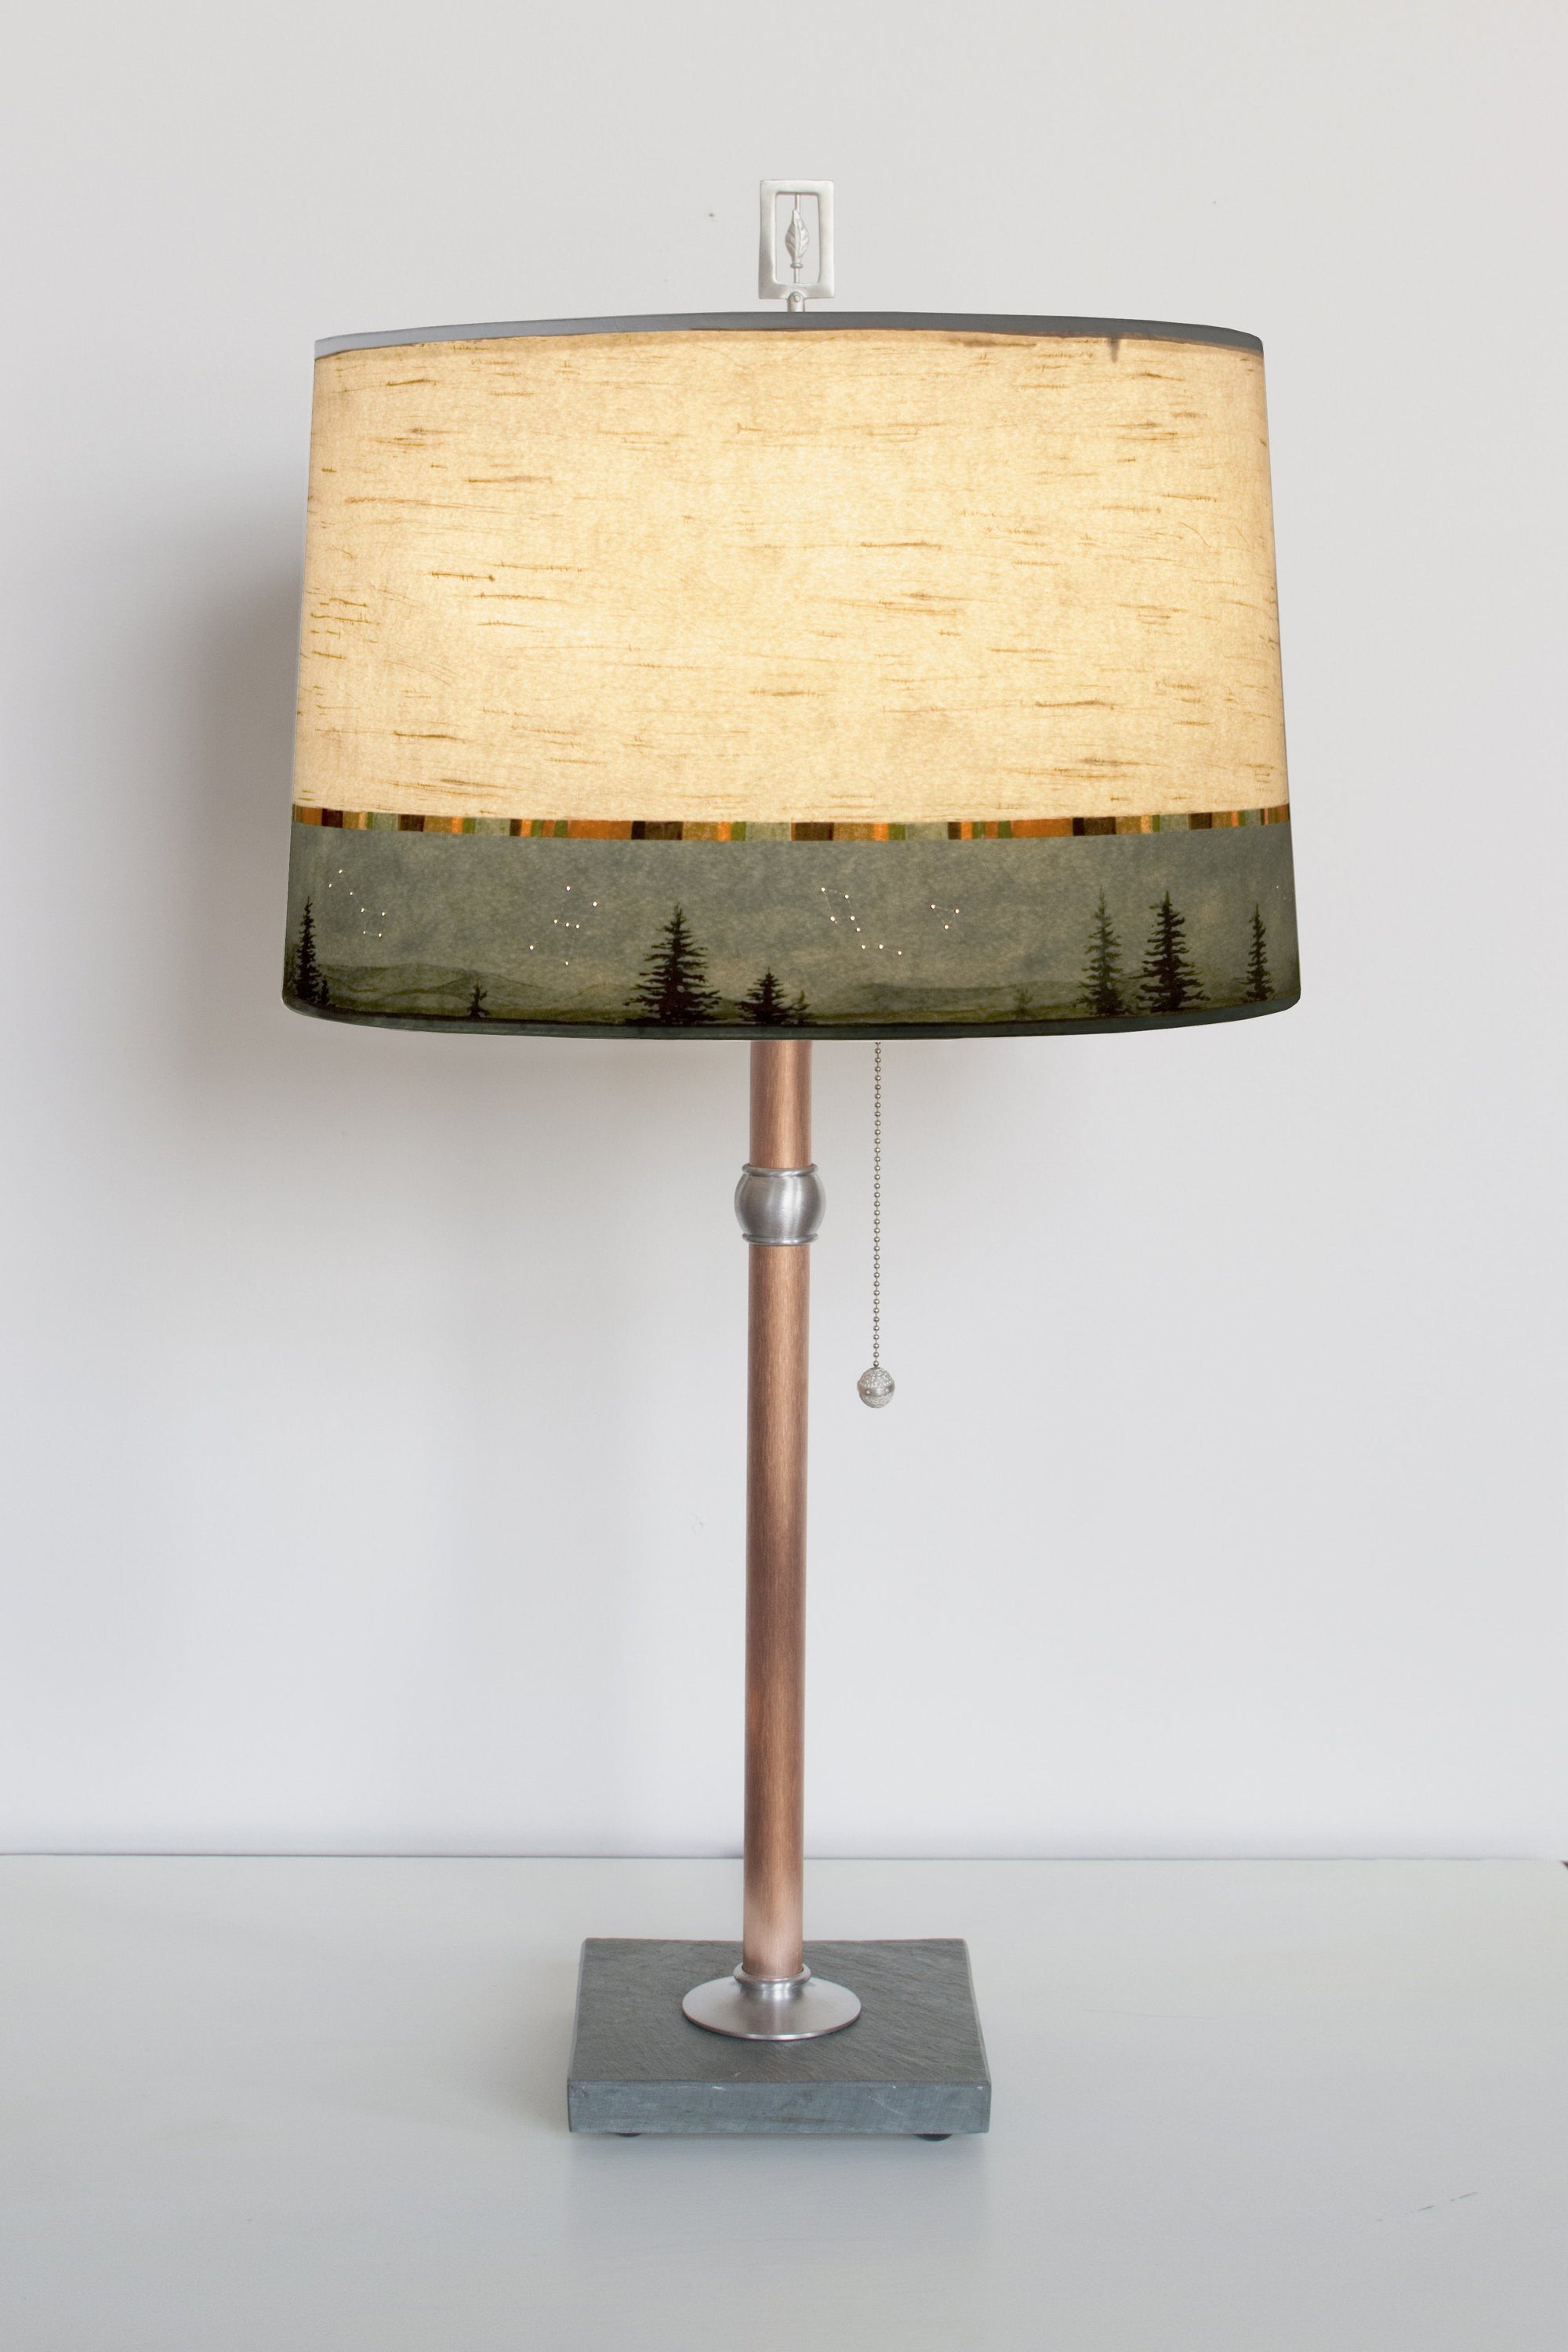 Janna Ugone & Co Table Lamps Copper Table Lamp with Large Drum Shade in Birch Midnight